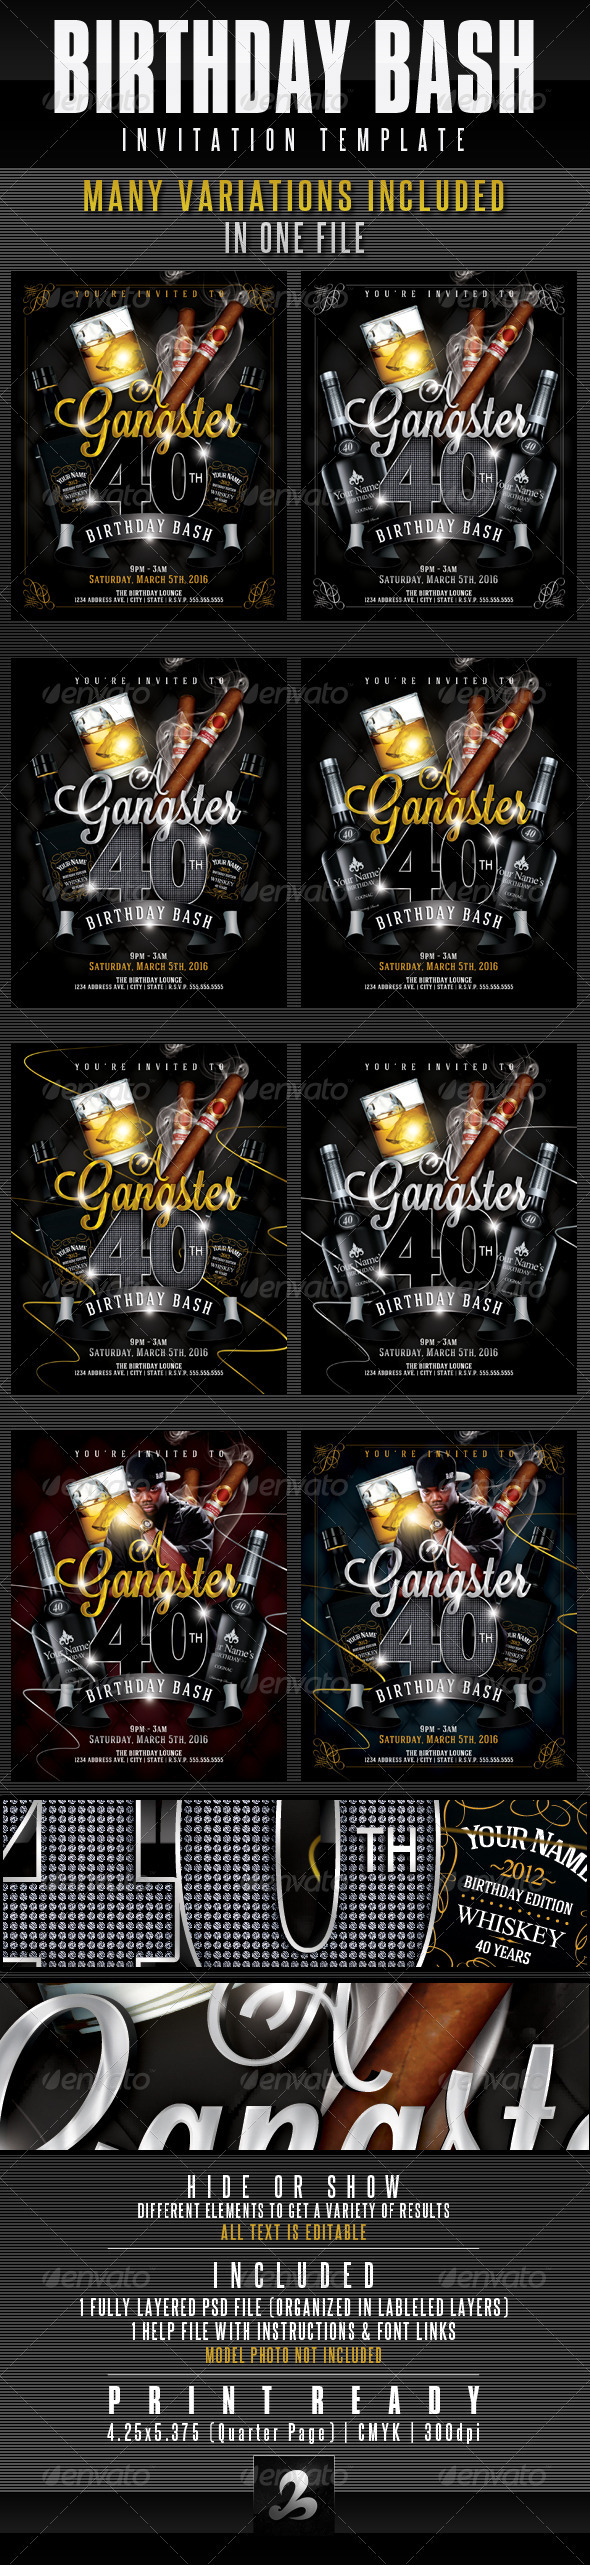 Download Gangster And Molls Party Invitations » Tinkytyler.org - Stock Photos & Graphics